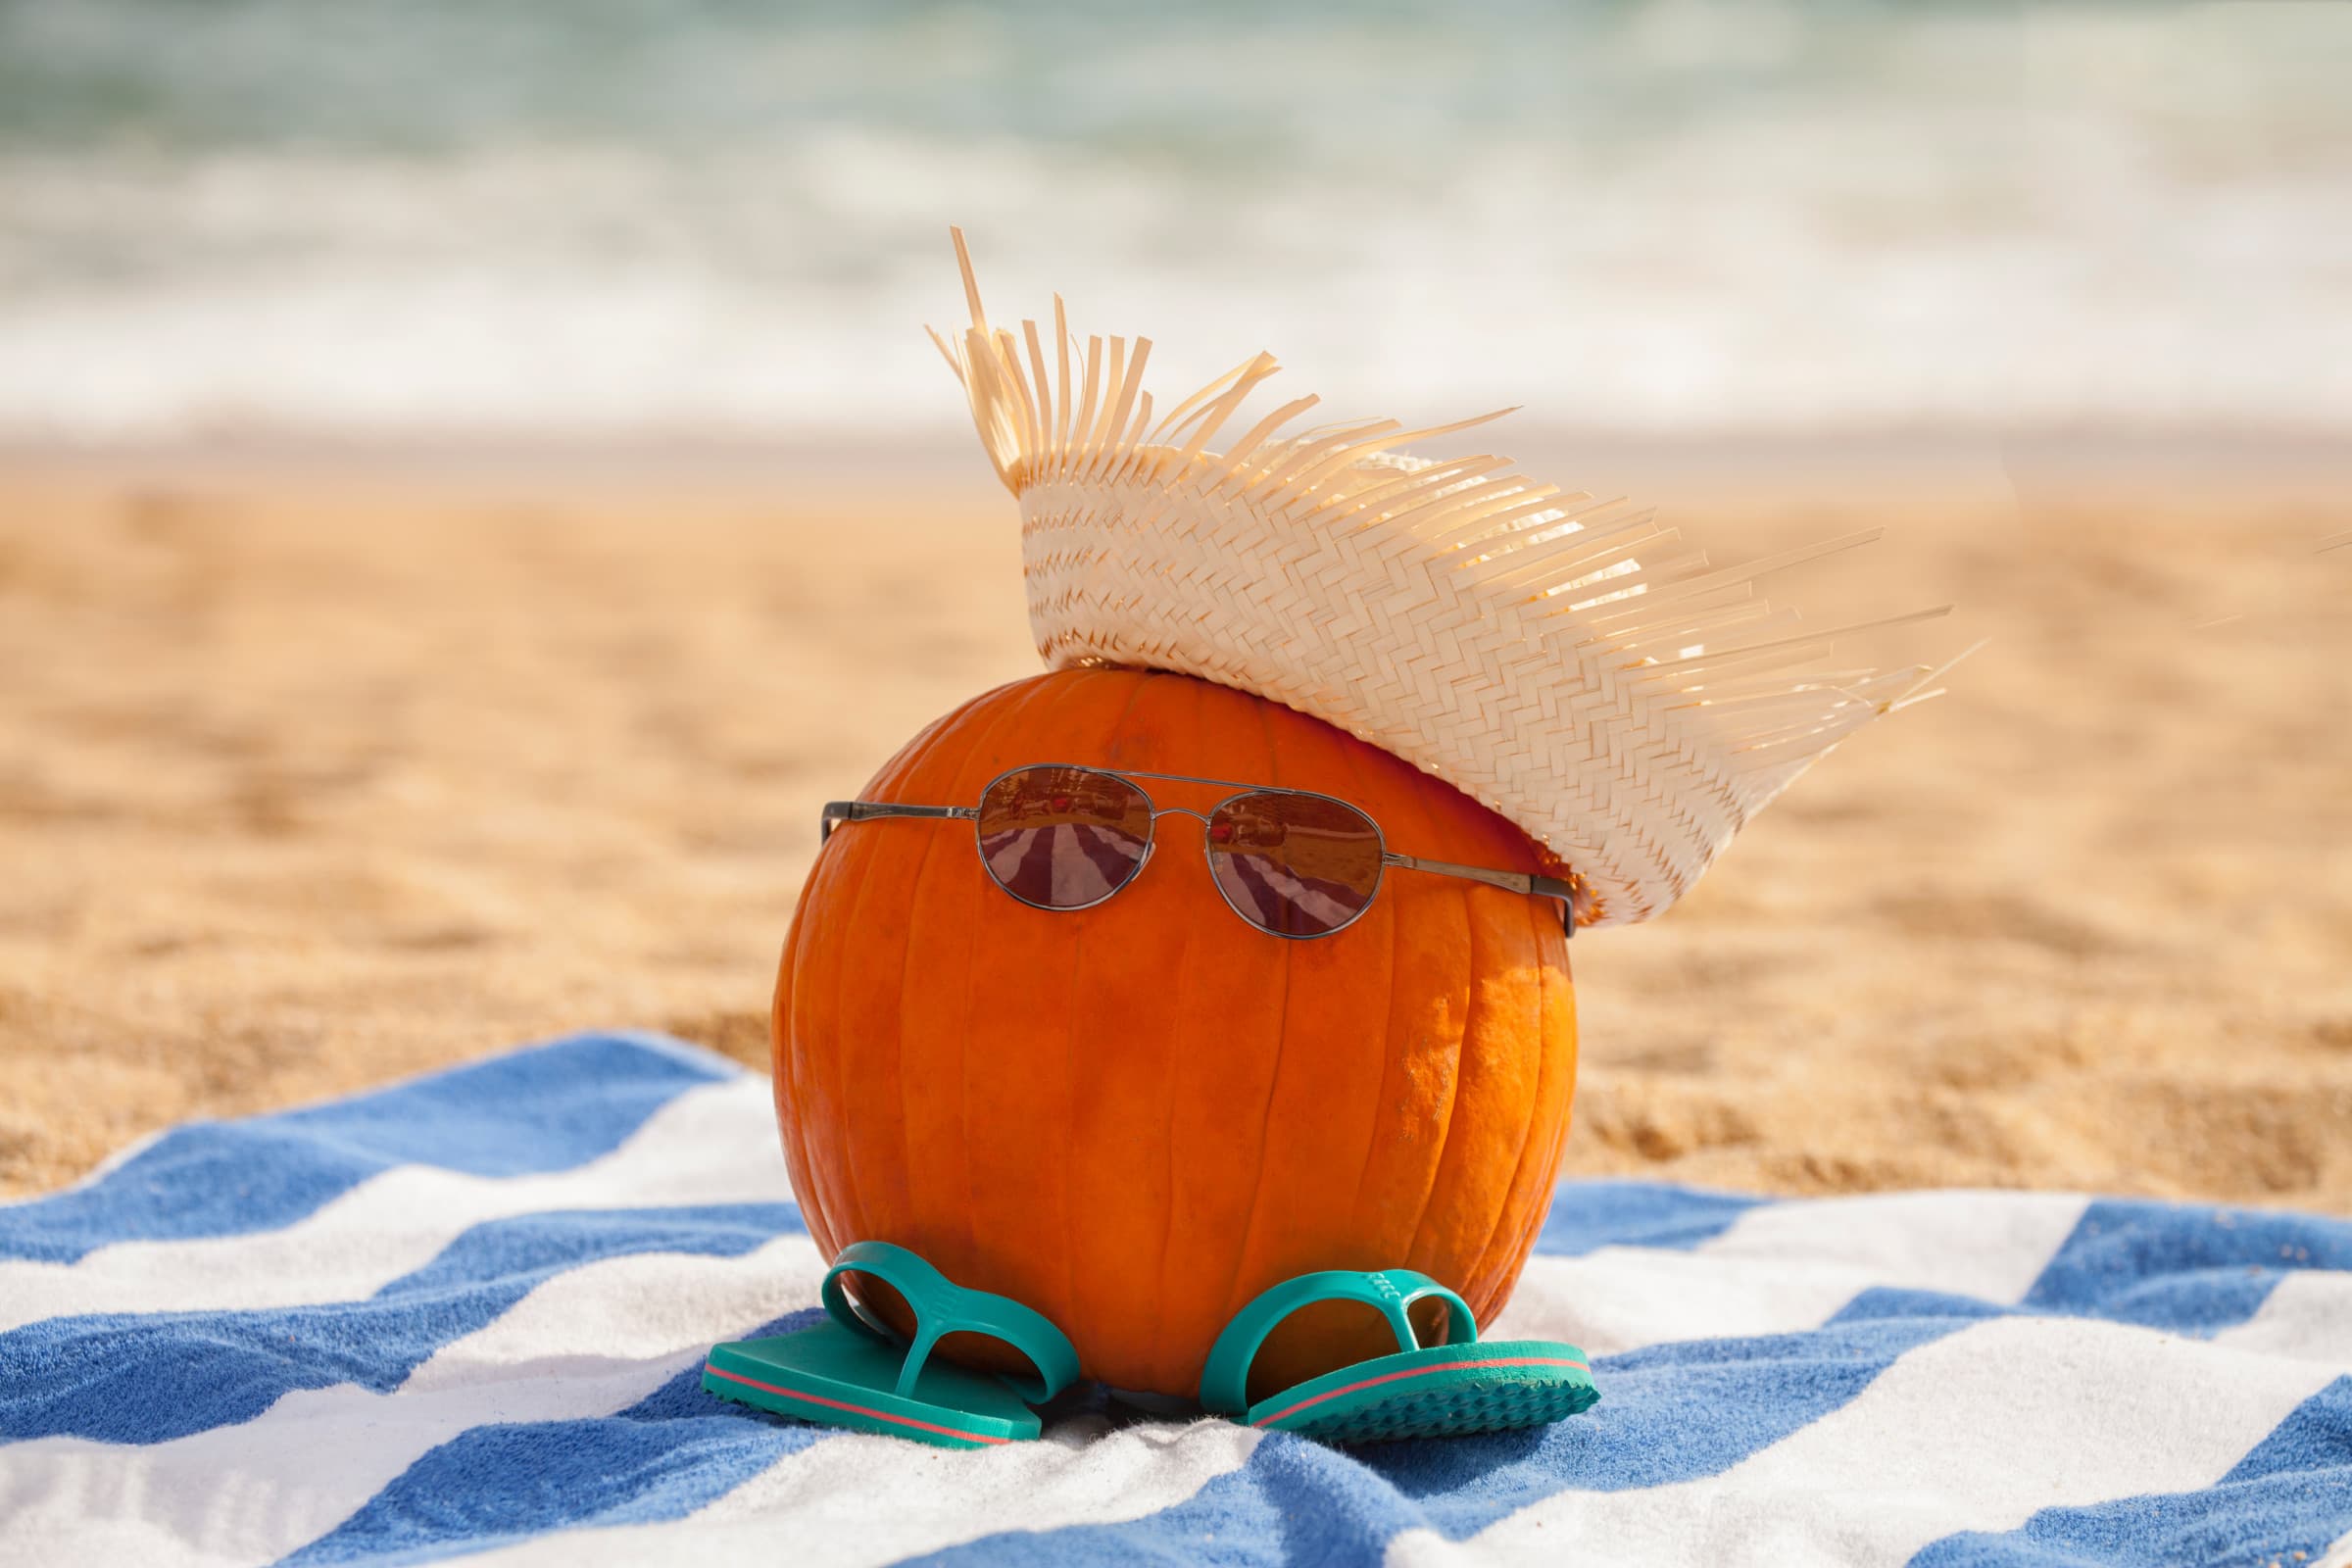 A pumpkin on a towel on a beach wearing sunglasses and a straw hat